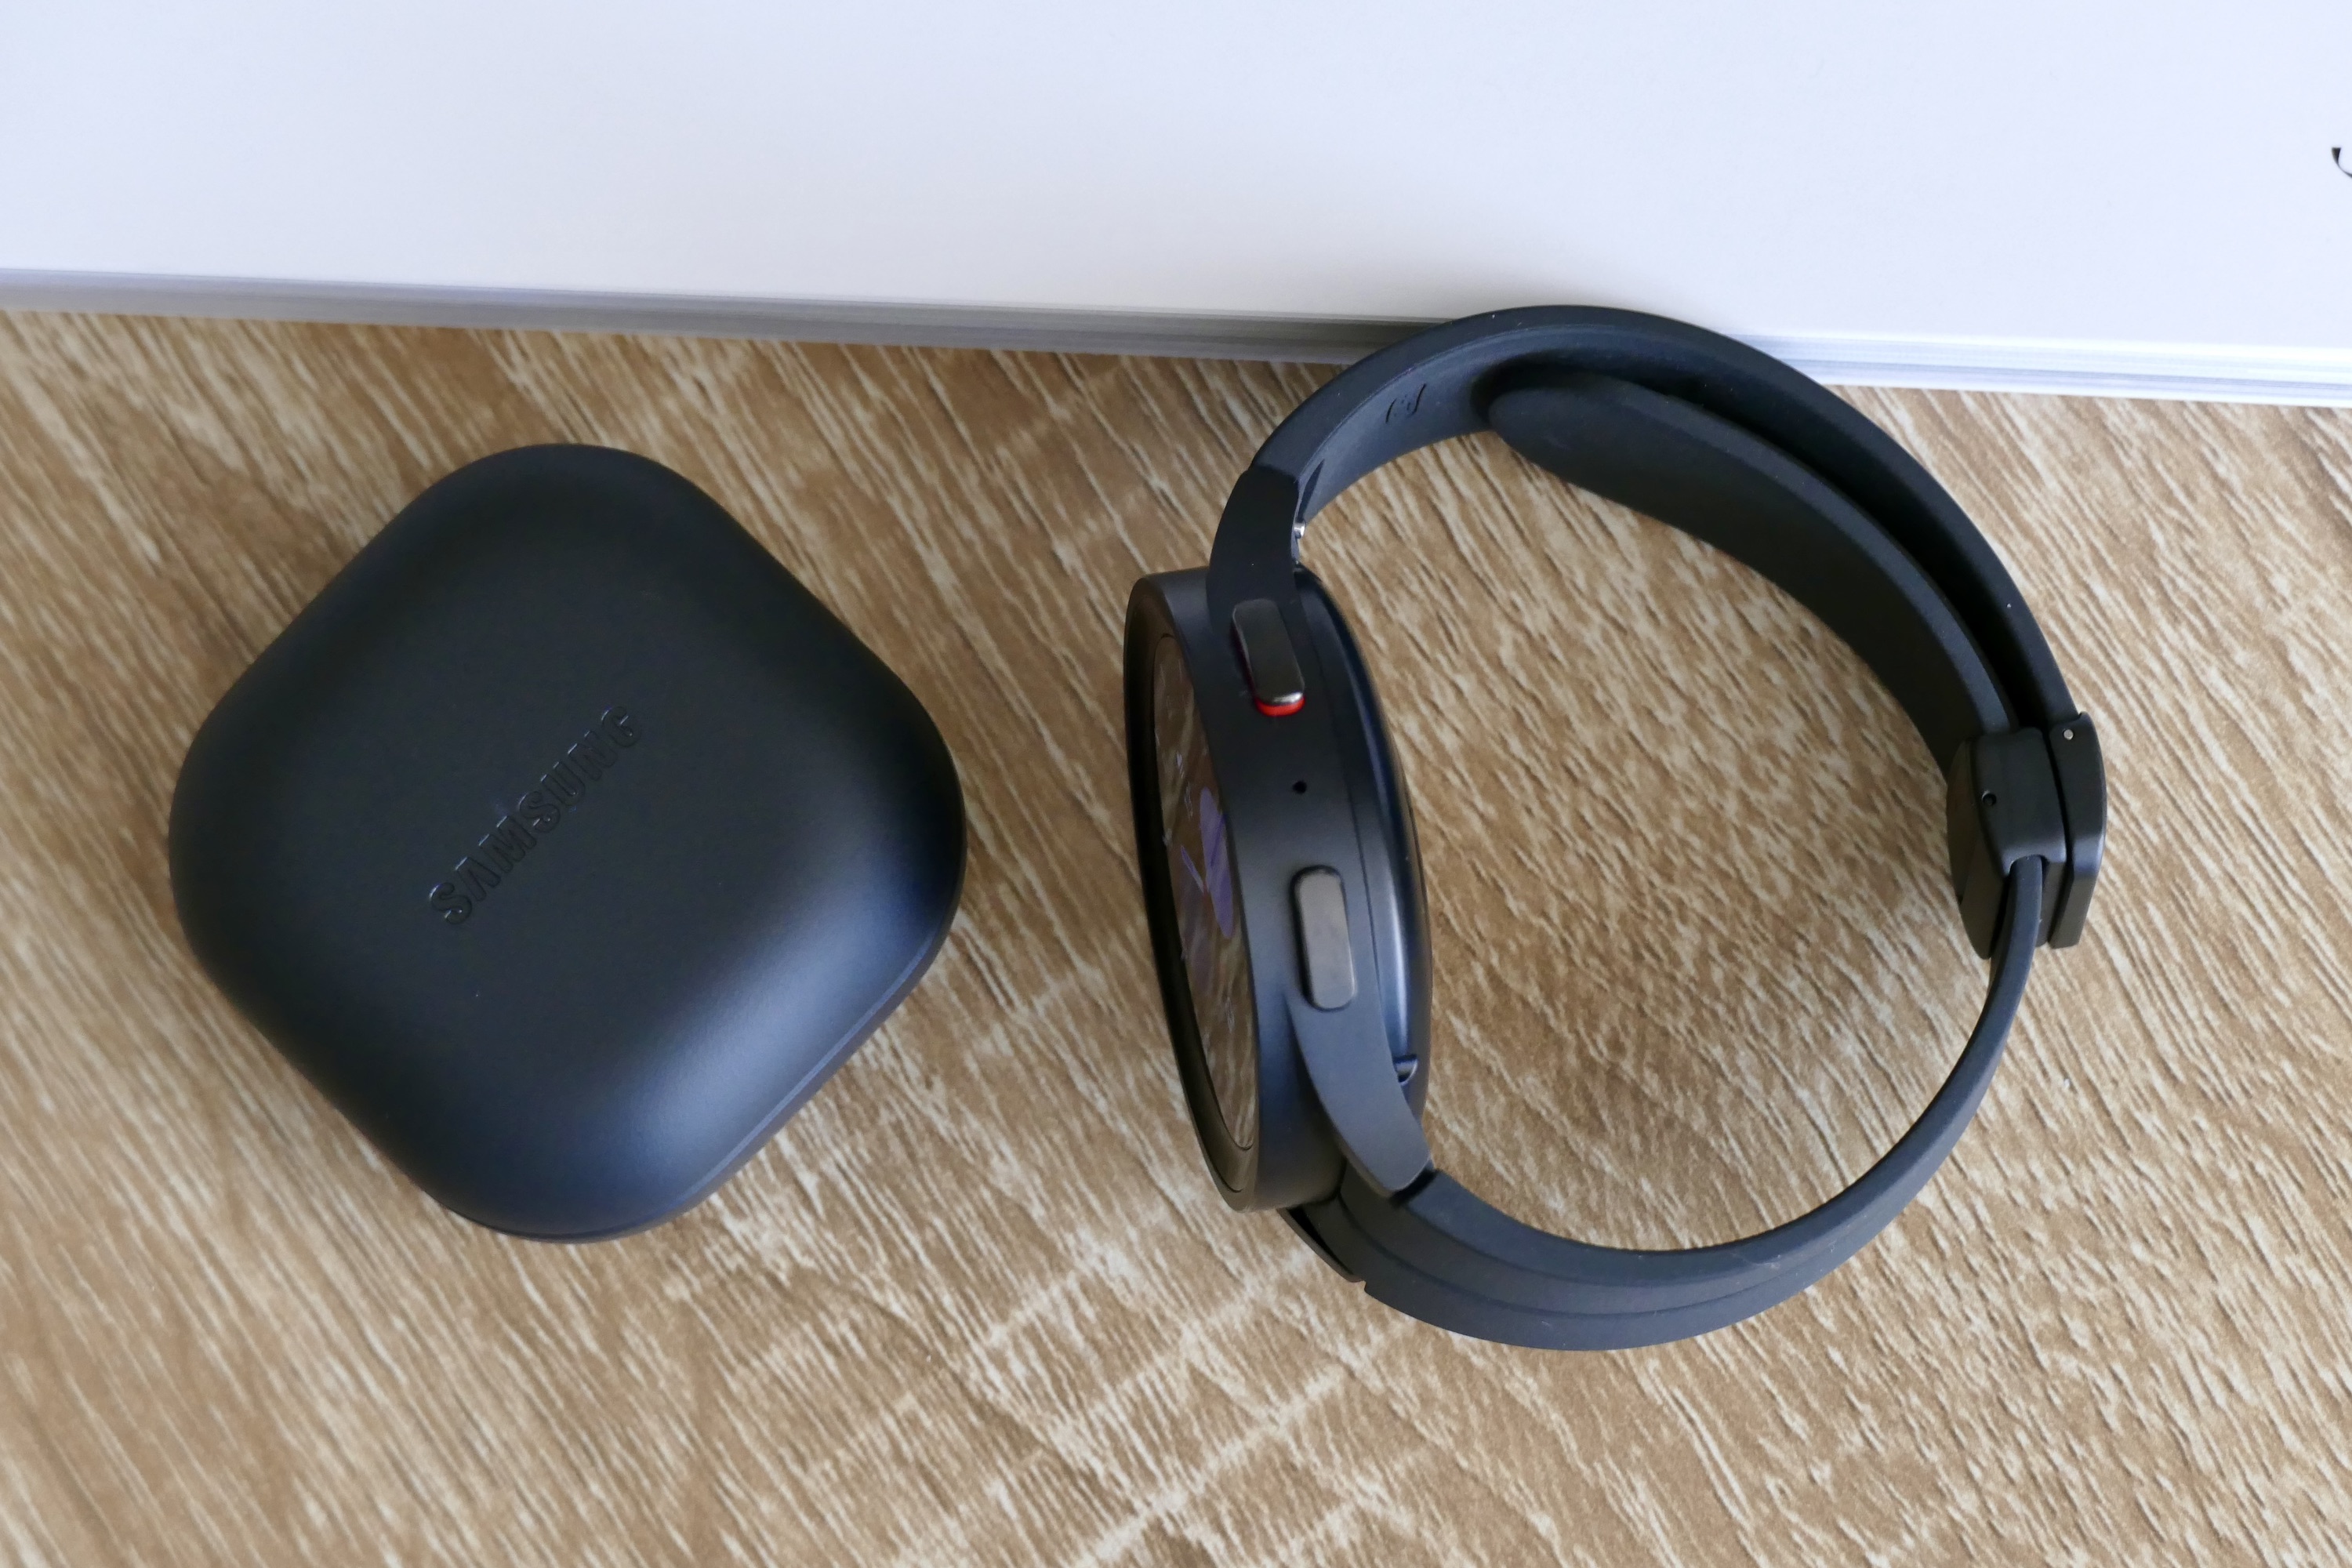 The Galaxy Watch 5 Pro seen from the side with the Galaxy Buds2 Pro alongside.